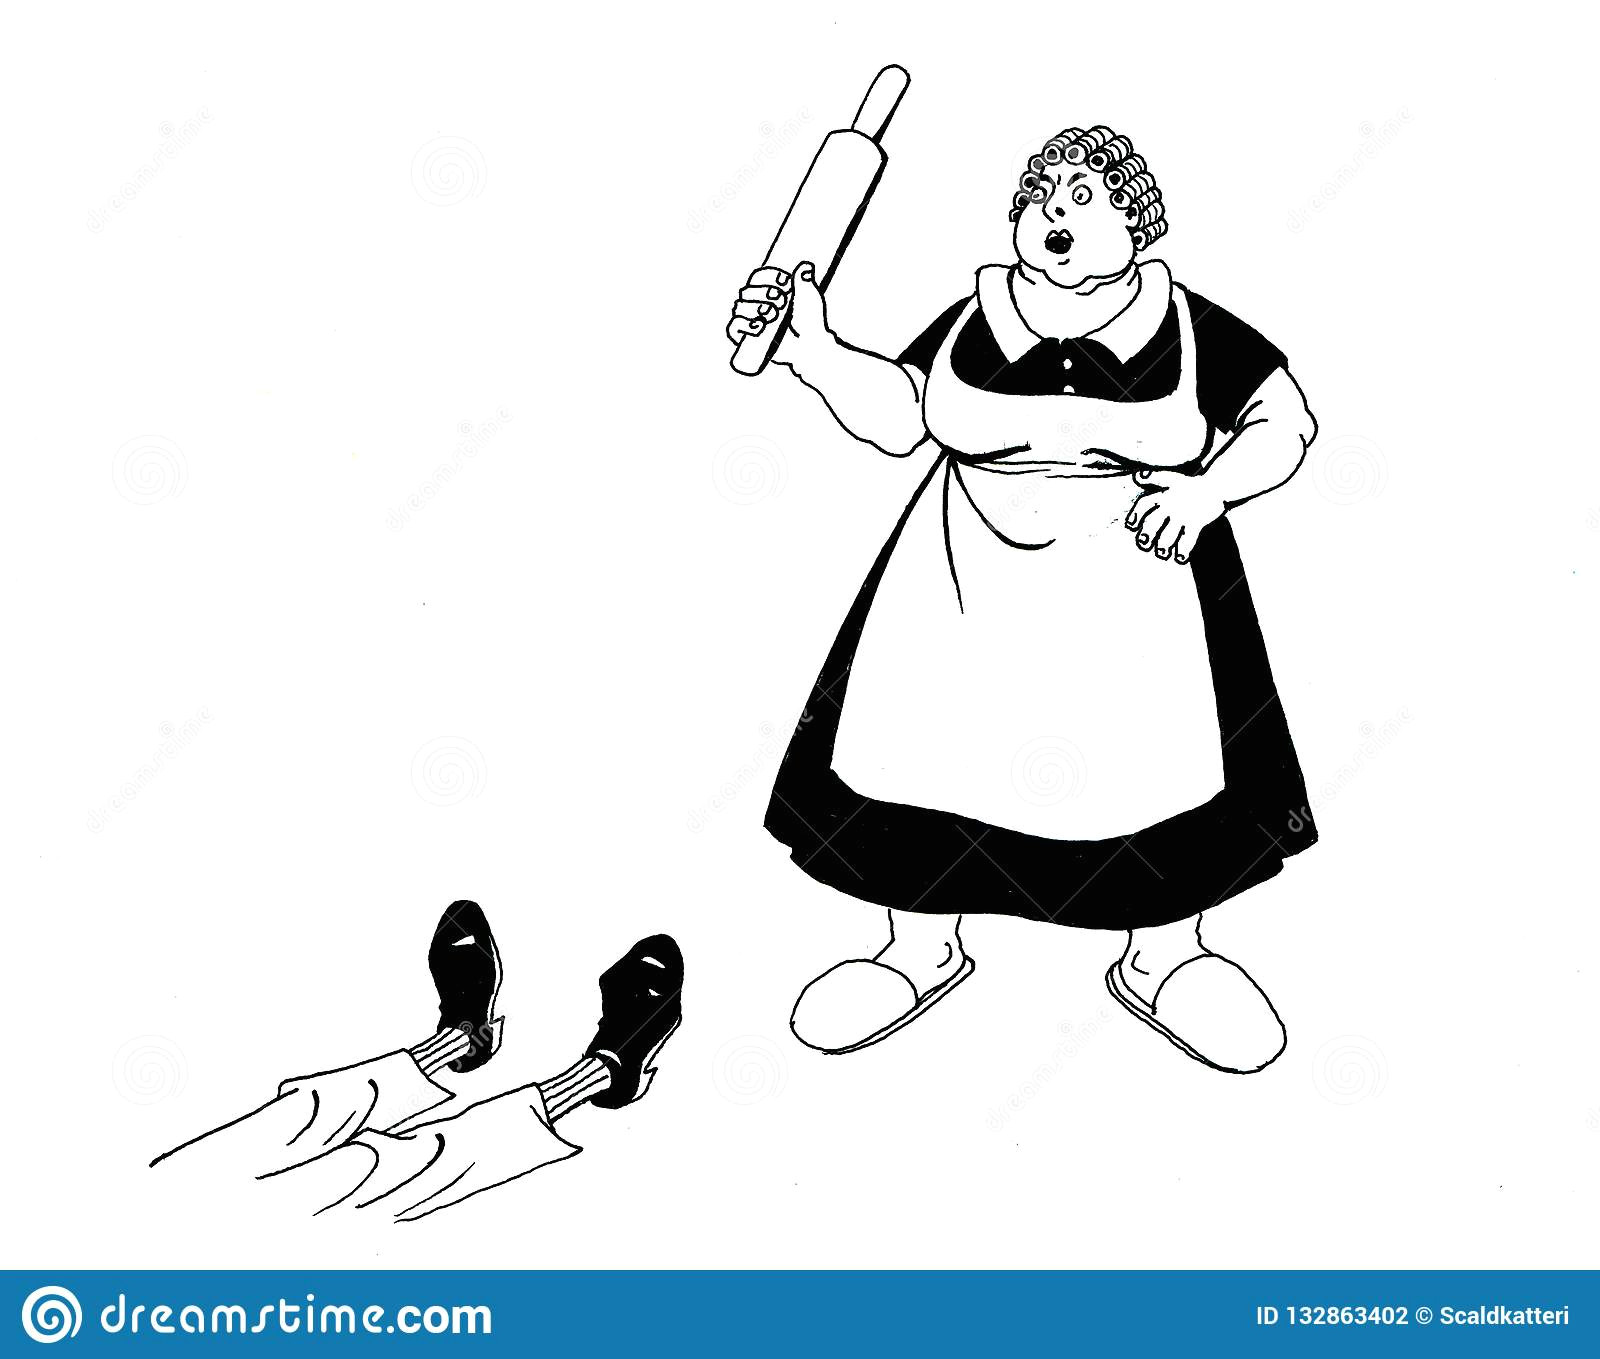 Drawing A Cartoon Chair Black and White Comic Cartoon Hand Drawing Of Angry Woman Hitting